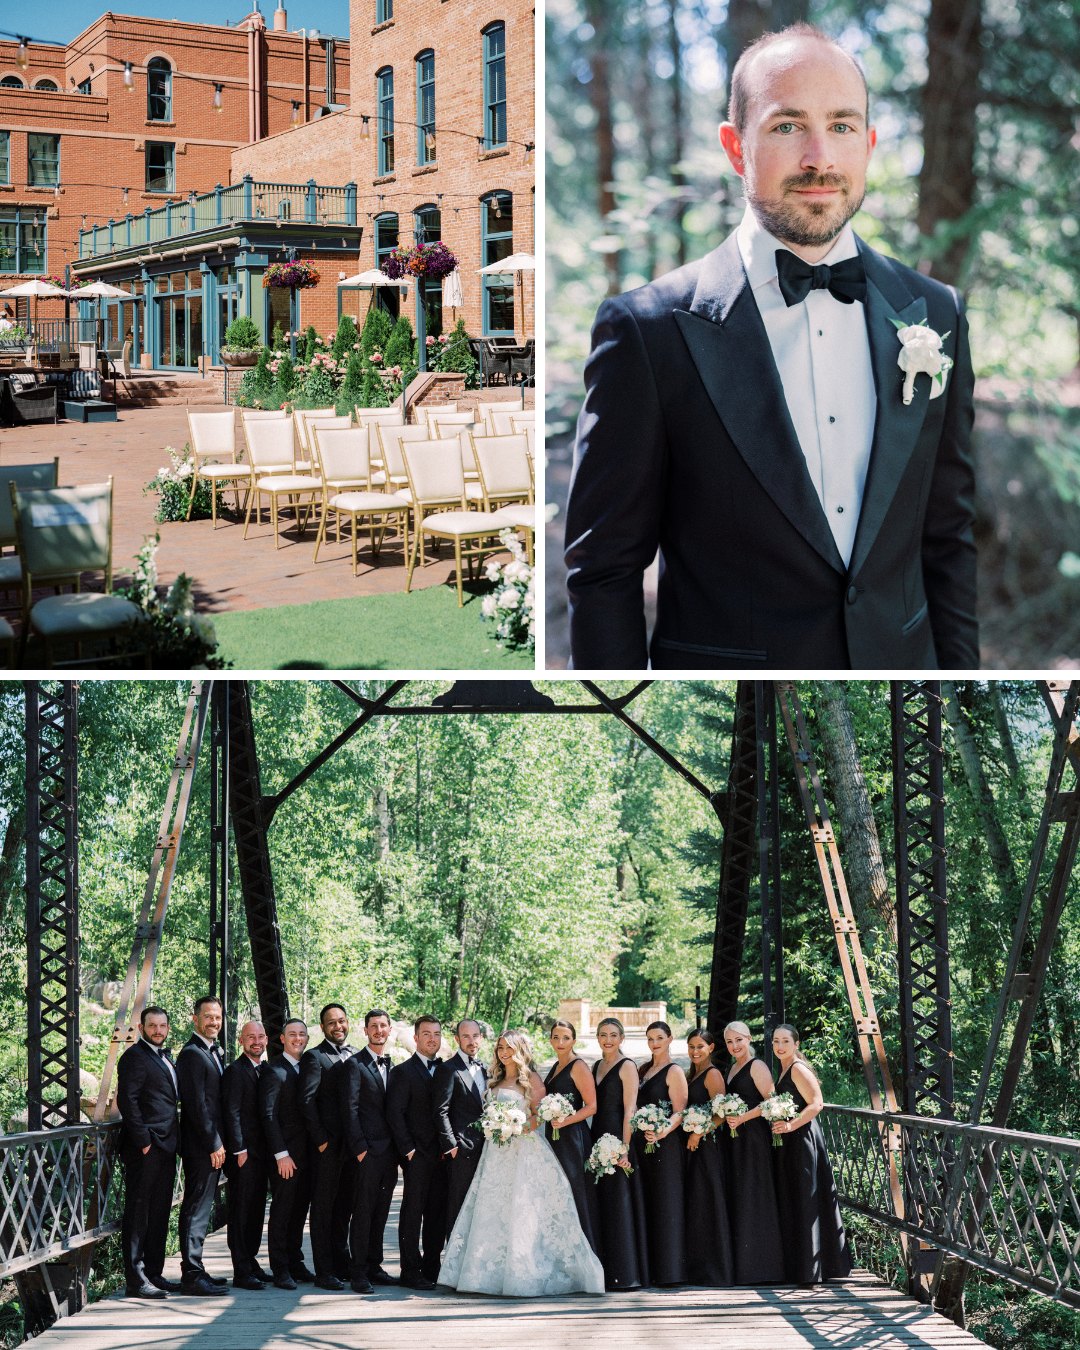 ceremony chairs with Hotel Jerome in the back, portrait of groom with bowtie, entire wedding party pose with couple on a bridge